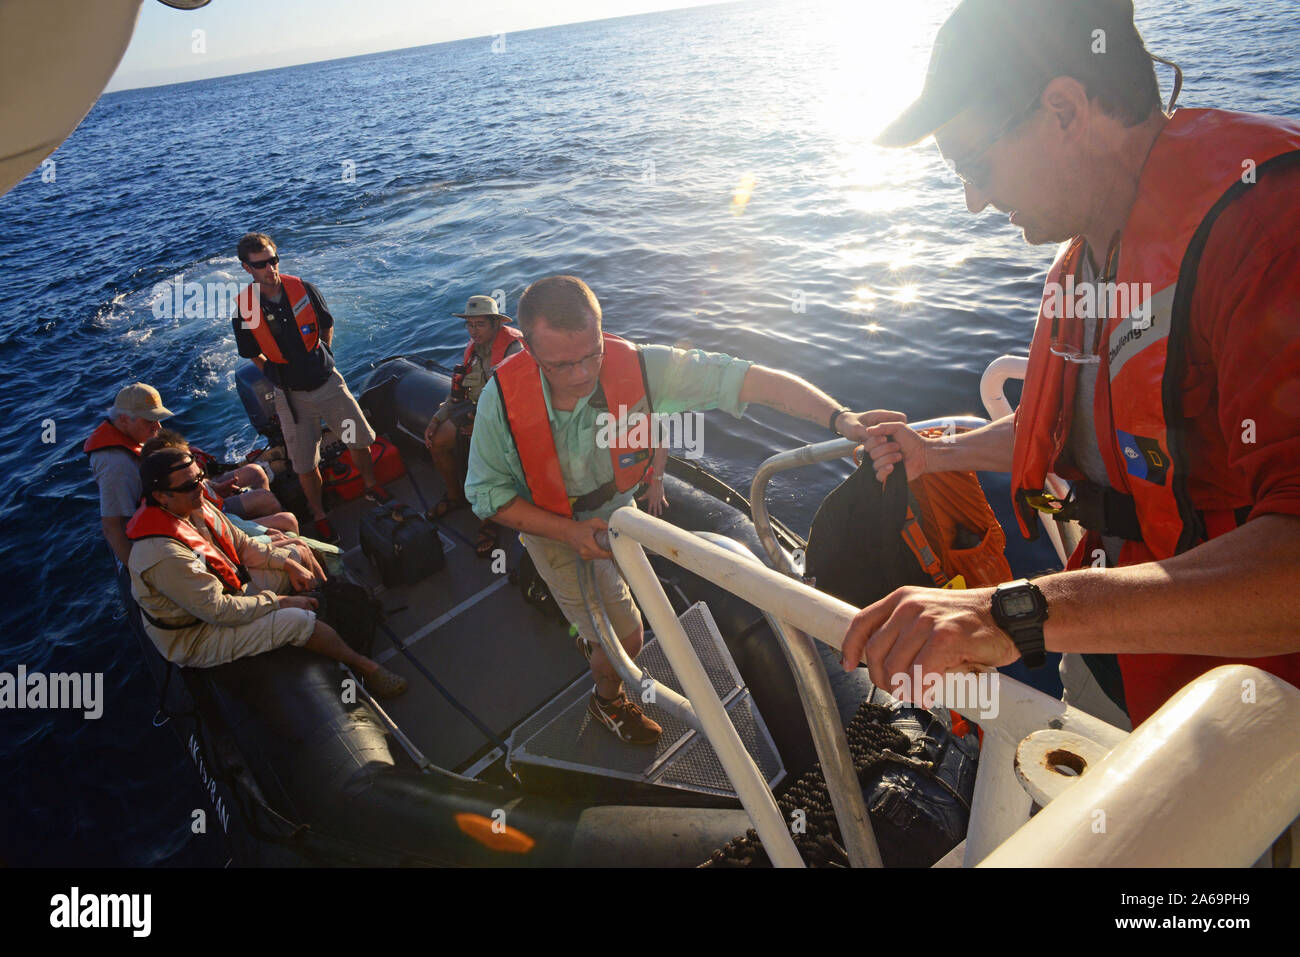 Passengers return to Lindblad Expeditions boat from zodiac tour, Baja California, Mexico Stock Photo